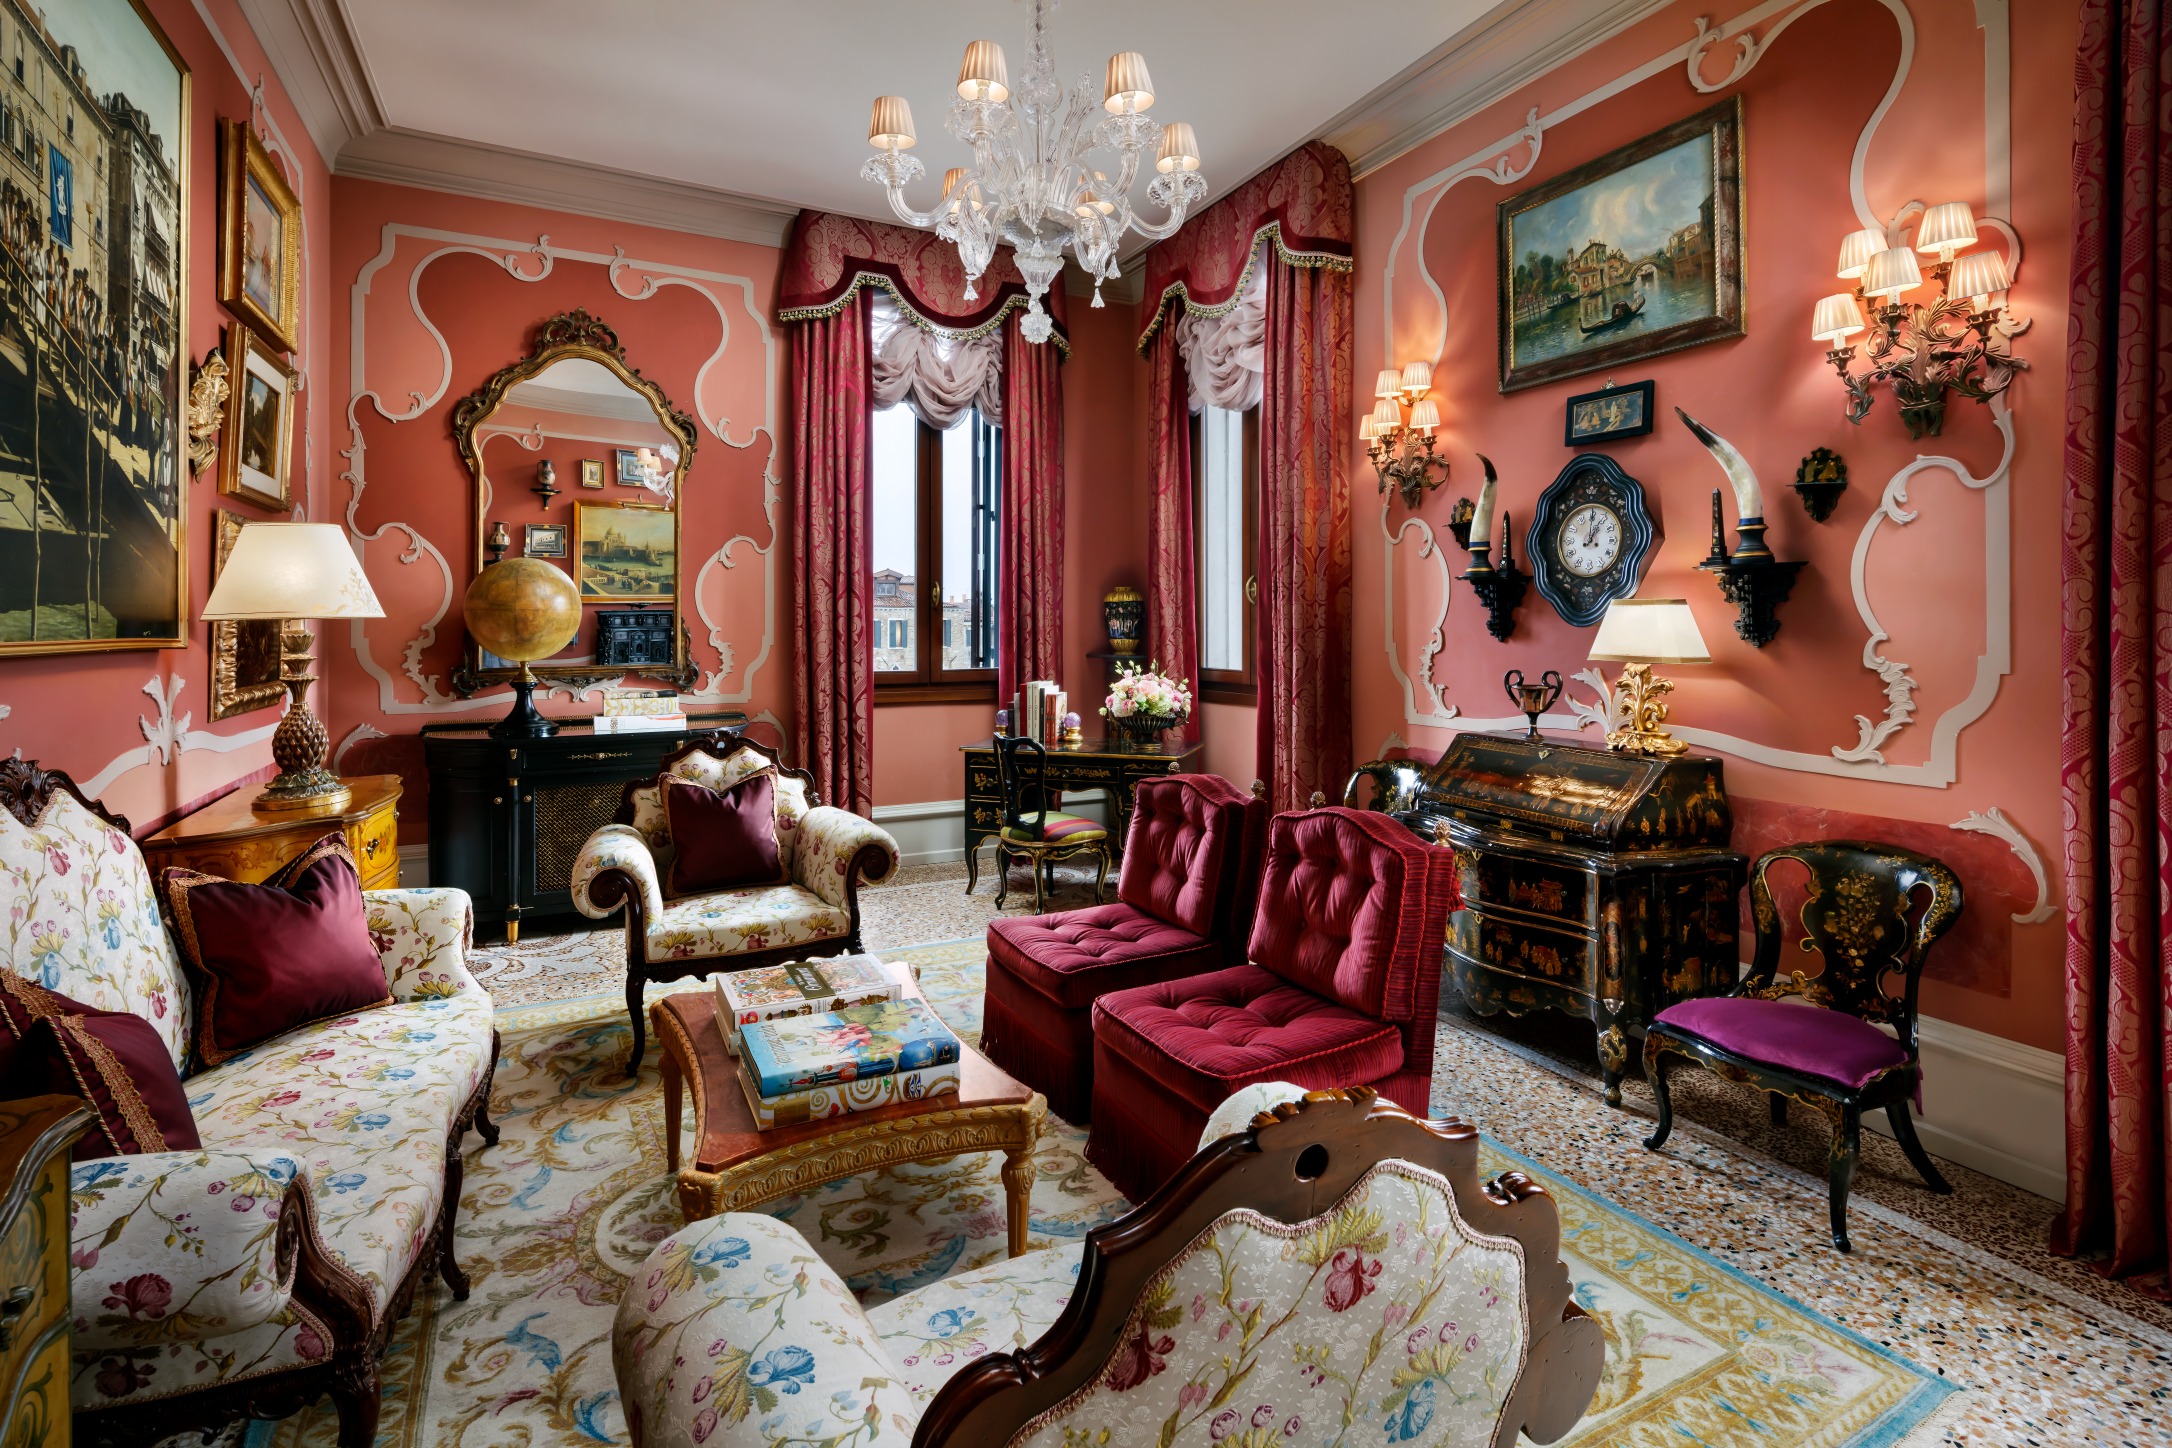 https://theauctioncollective.com/media/4553/the-gritti-palace-4.jpg